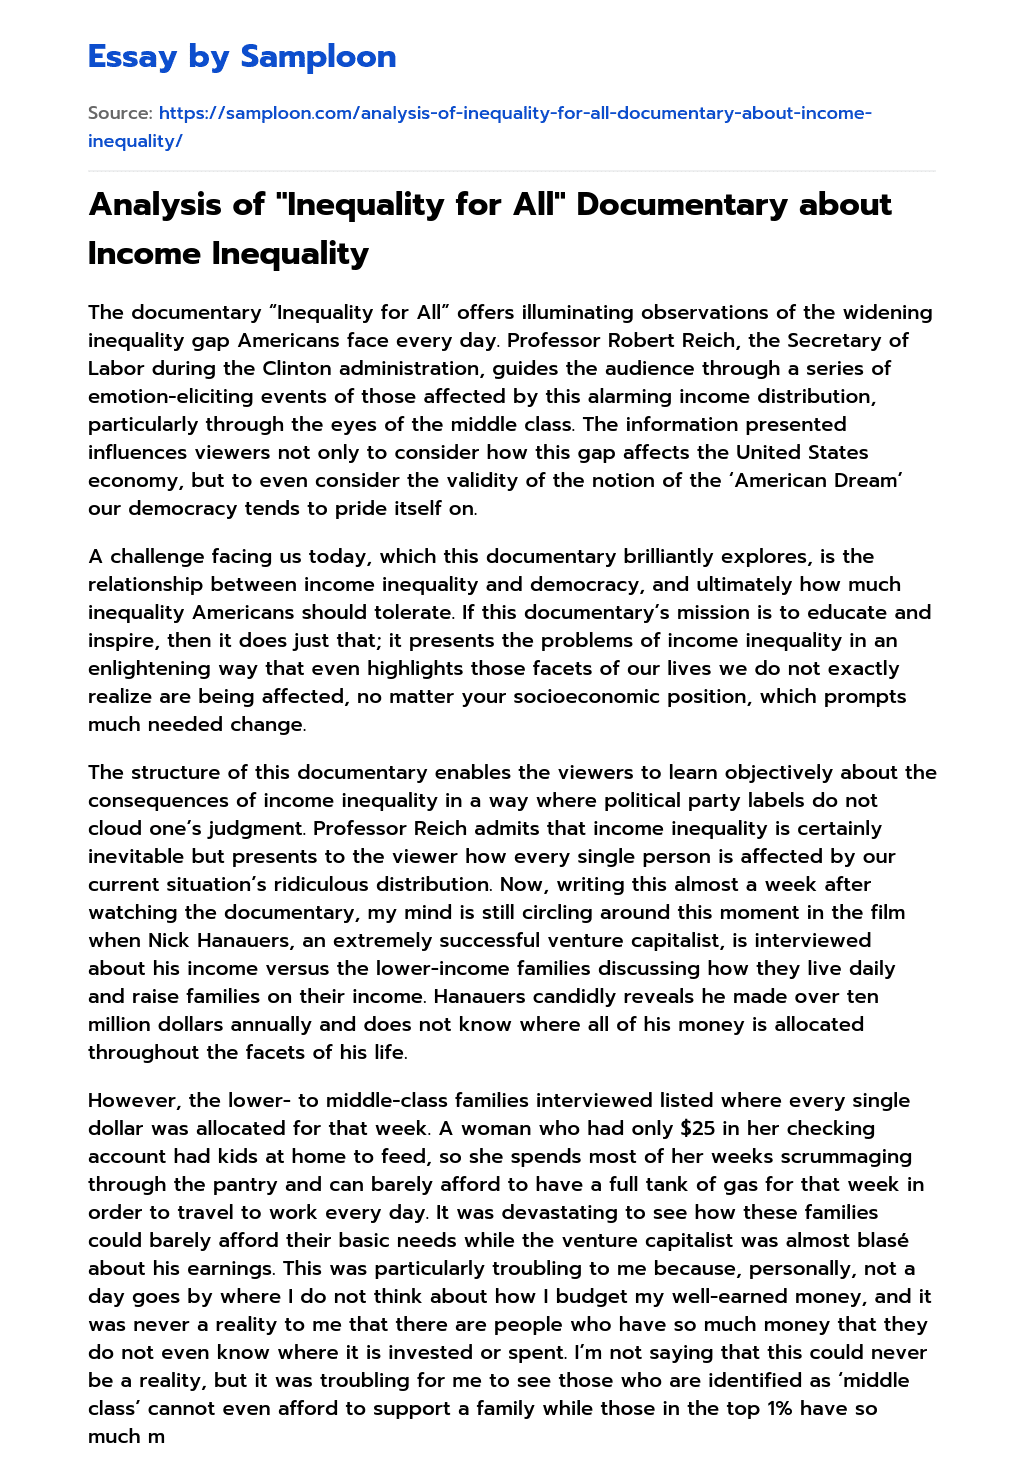 Analysis of “Inequality for All” Documentary about Income Inequality essay